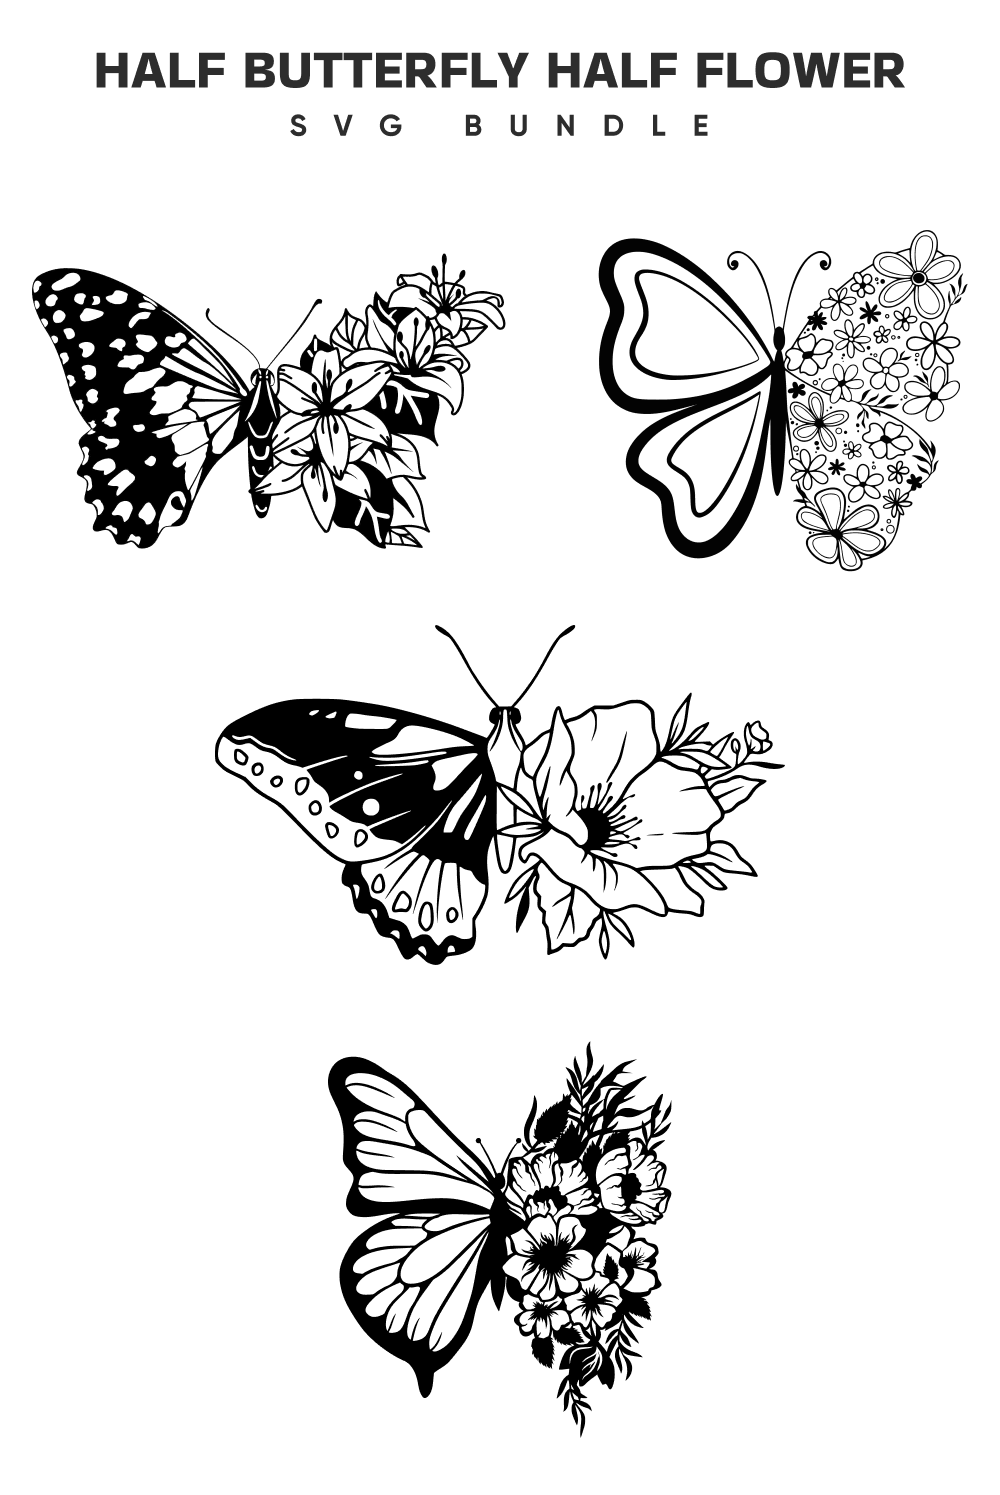 Black and white image of butterflies and flowers.